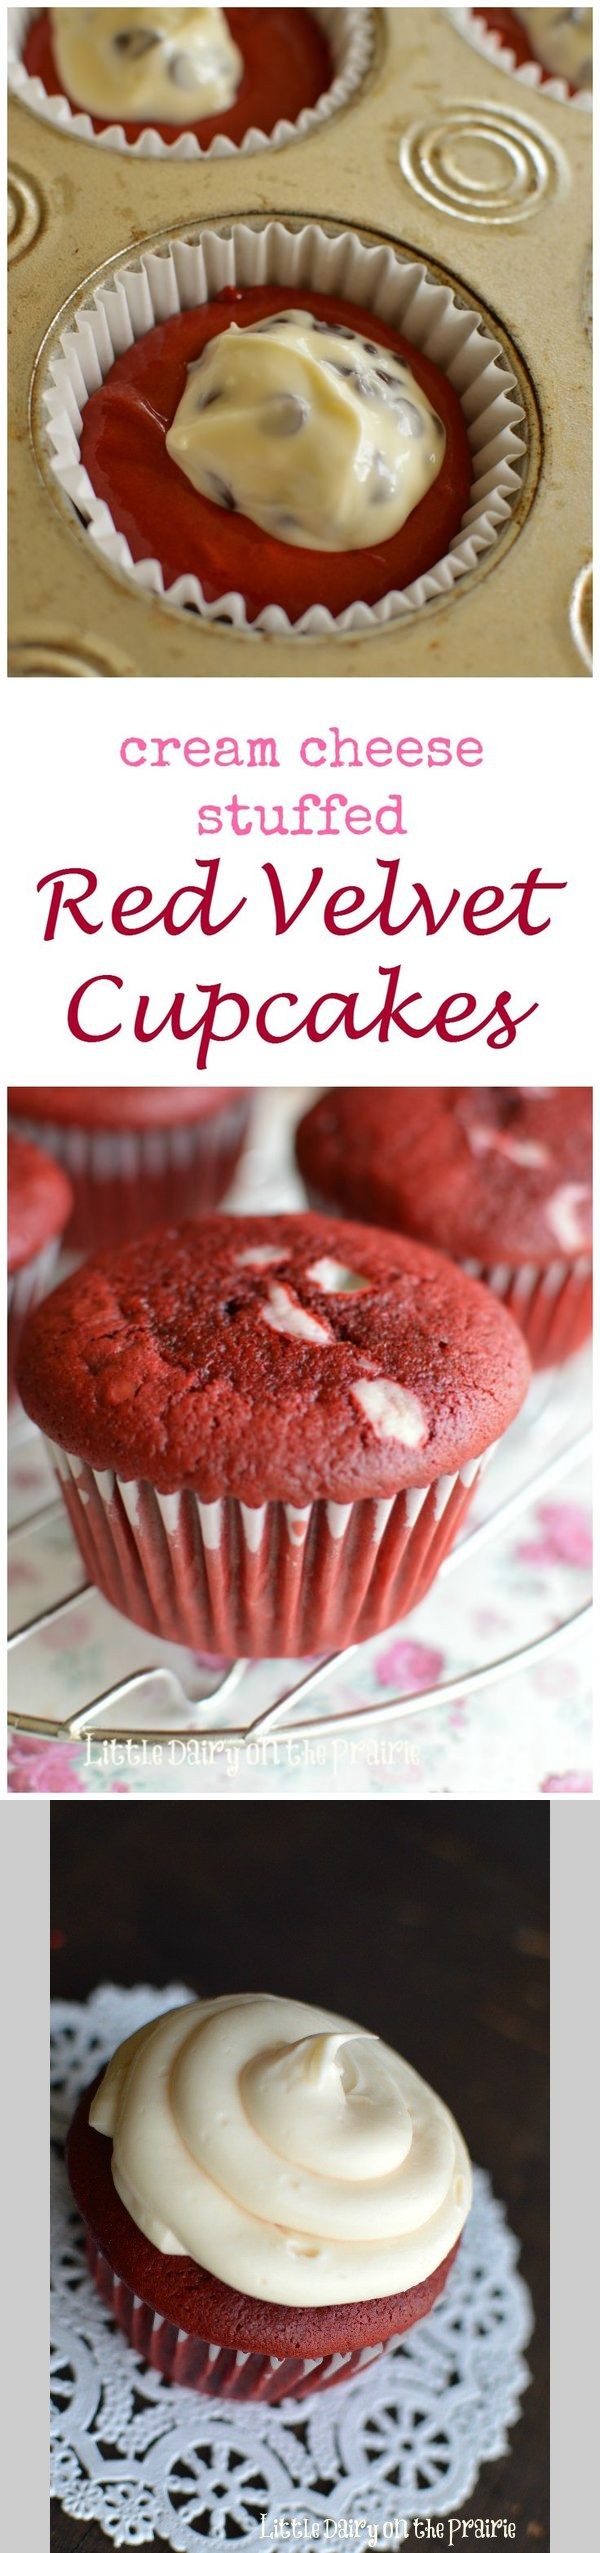 Red Velvet Cupcakes (with cream cheese surprise inside